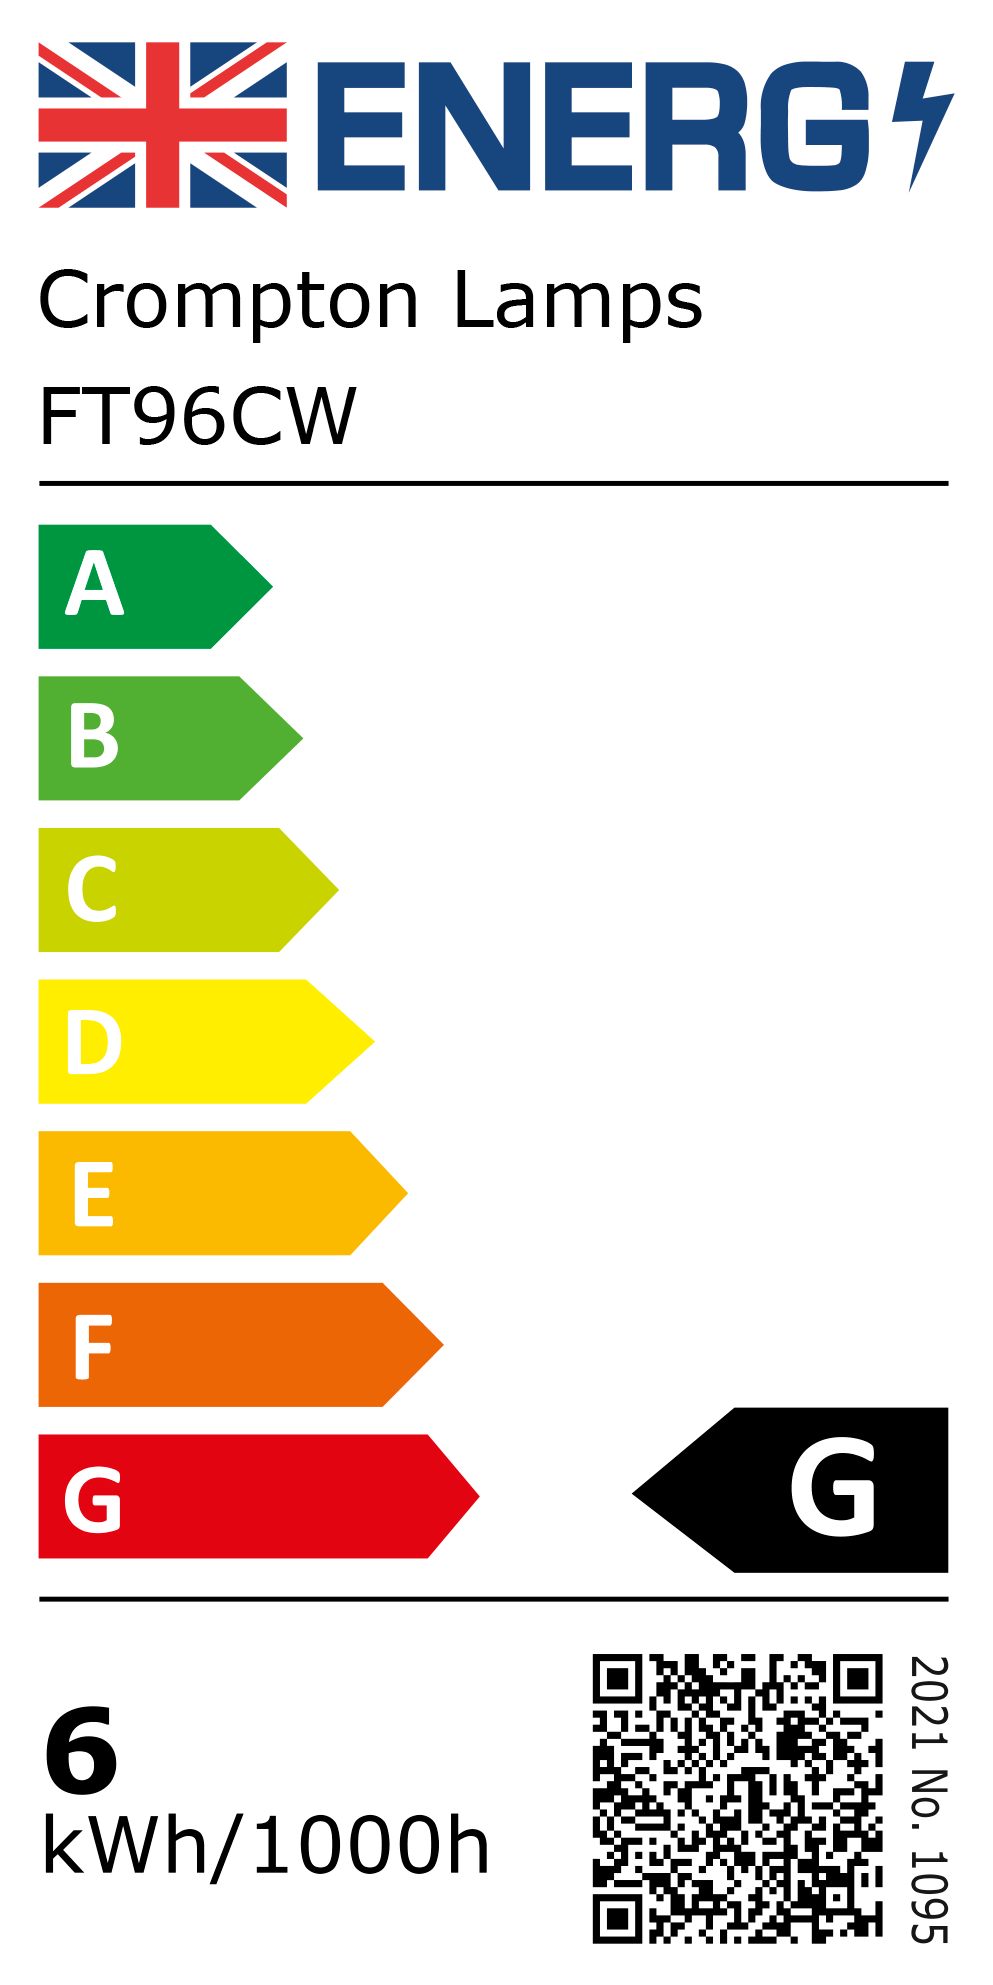 New 2021 Energy Rating Label: Stock Code FT96CW